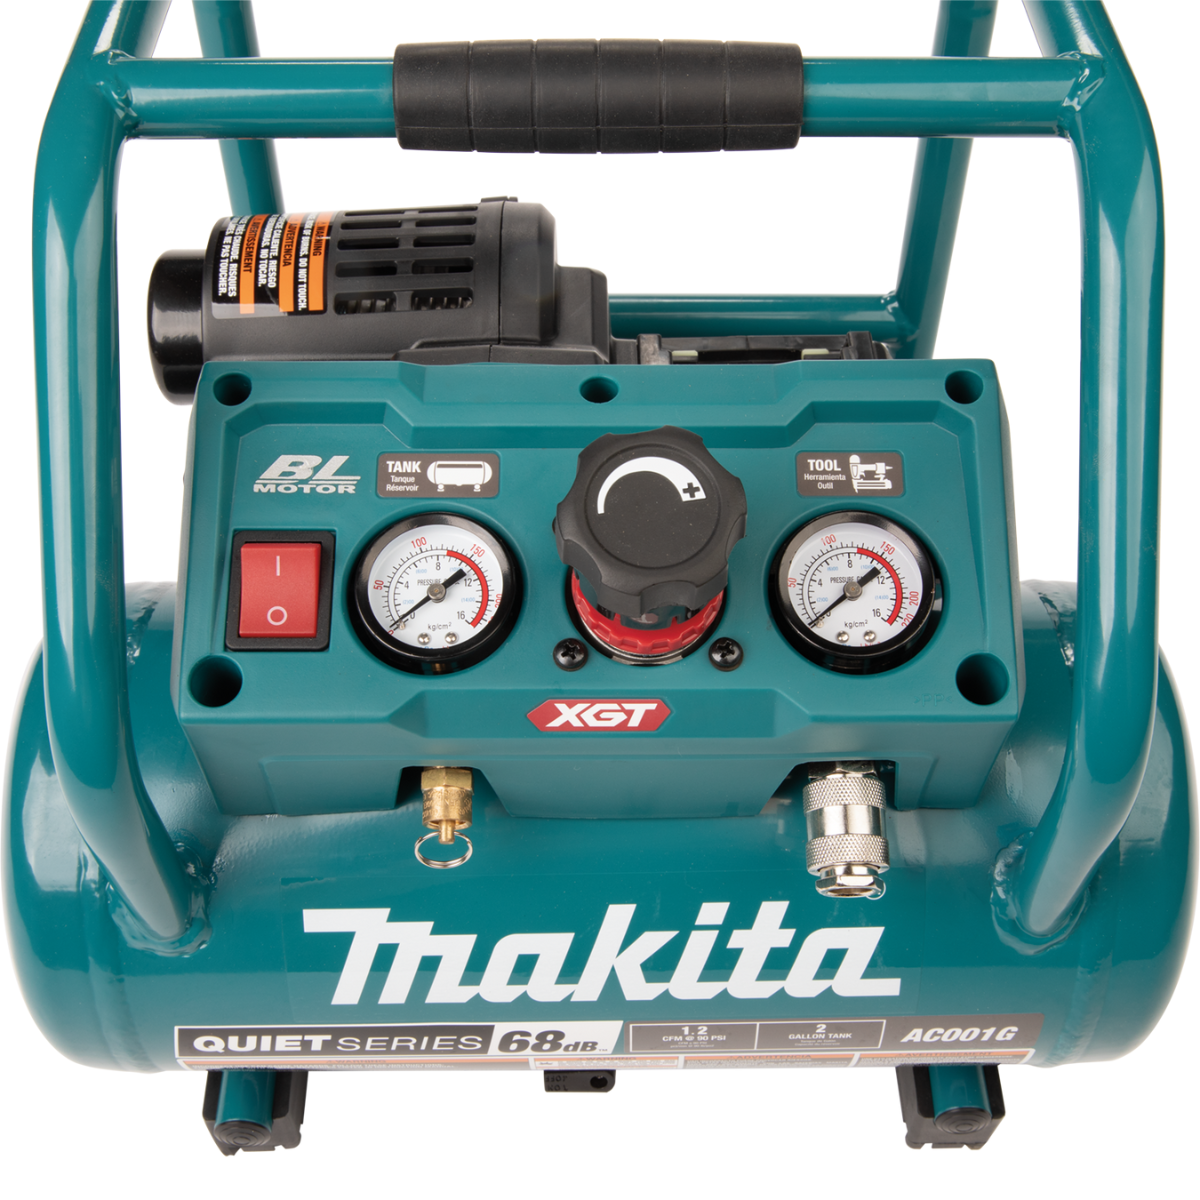 Makita AC001GZ 40Vmax XGT Brushless 7.6L Air Compressor Body Only